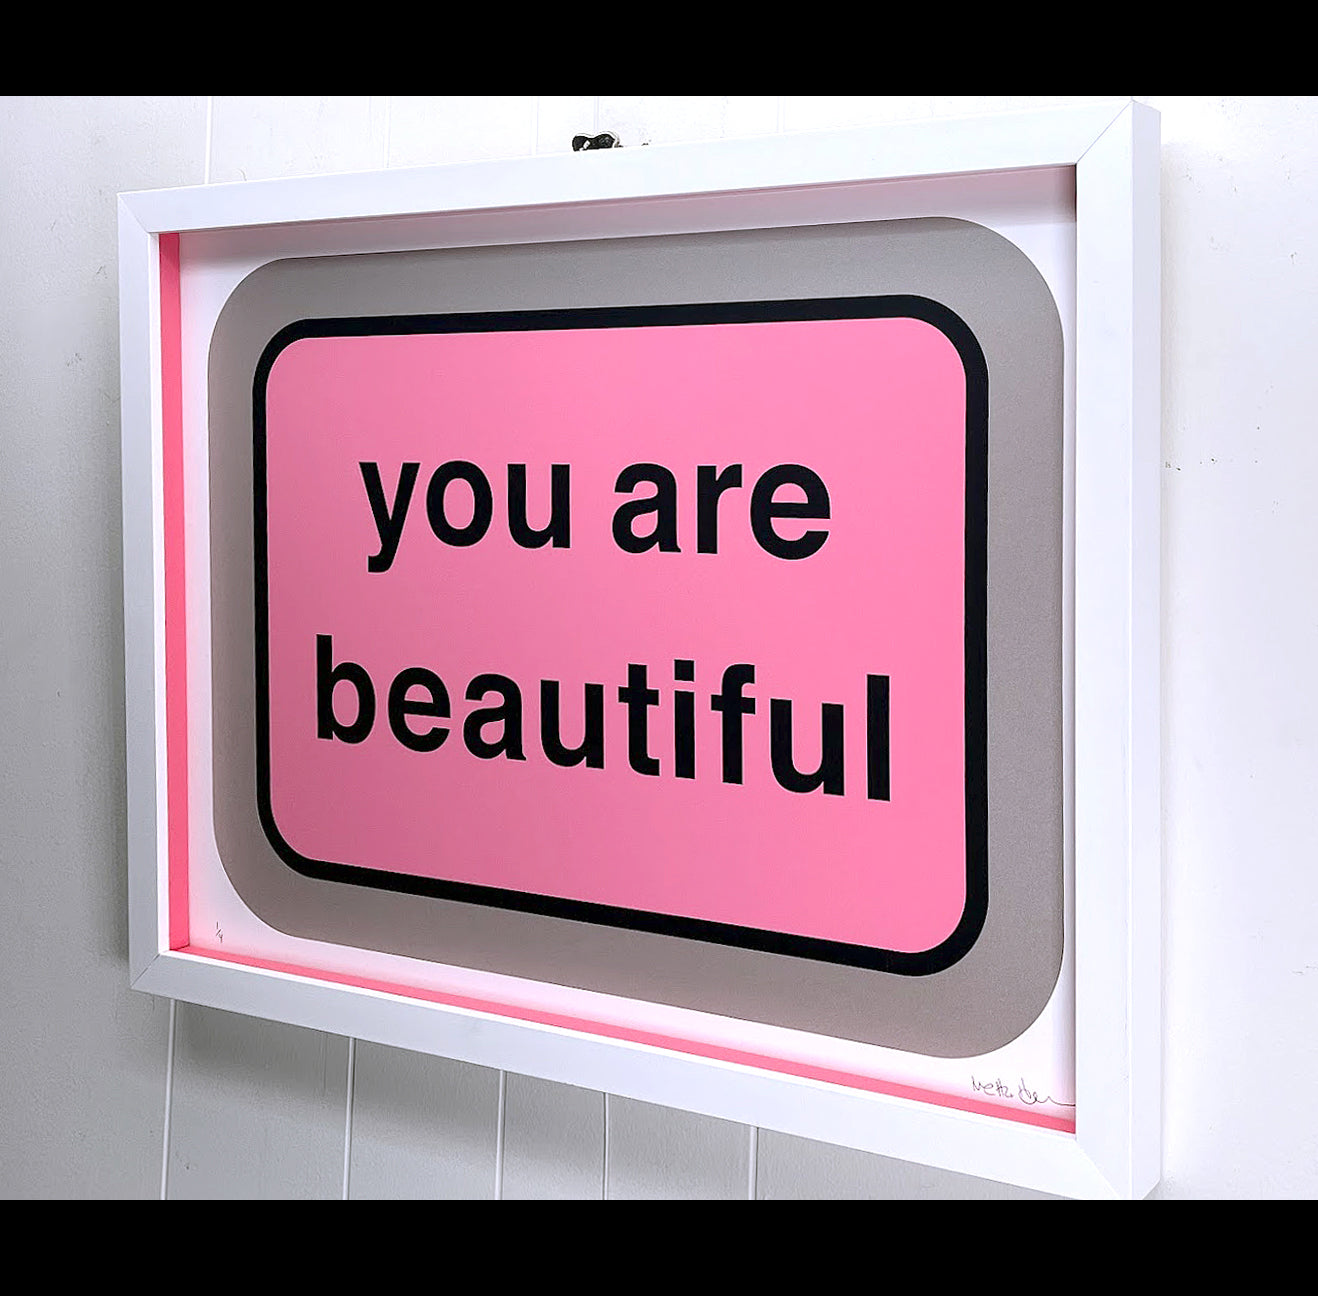 You Are Beautiful by Matthew Hoffman (Pink Variant)